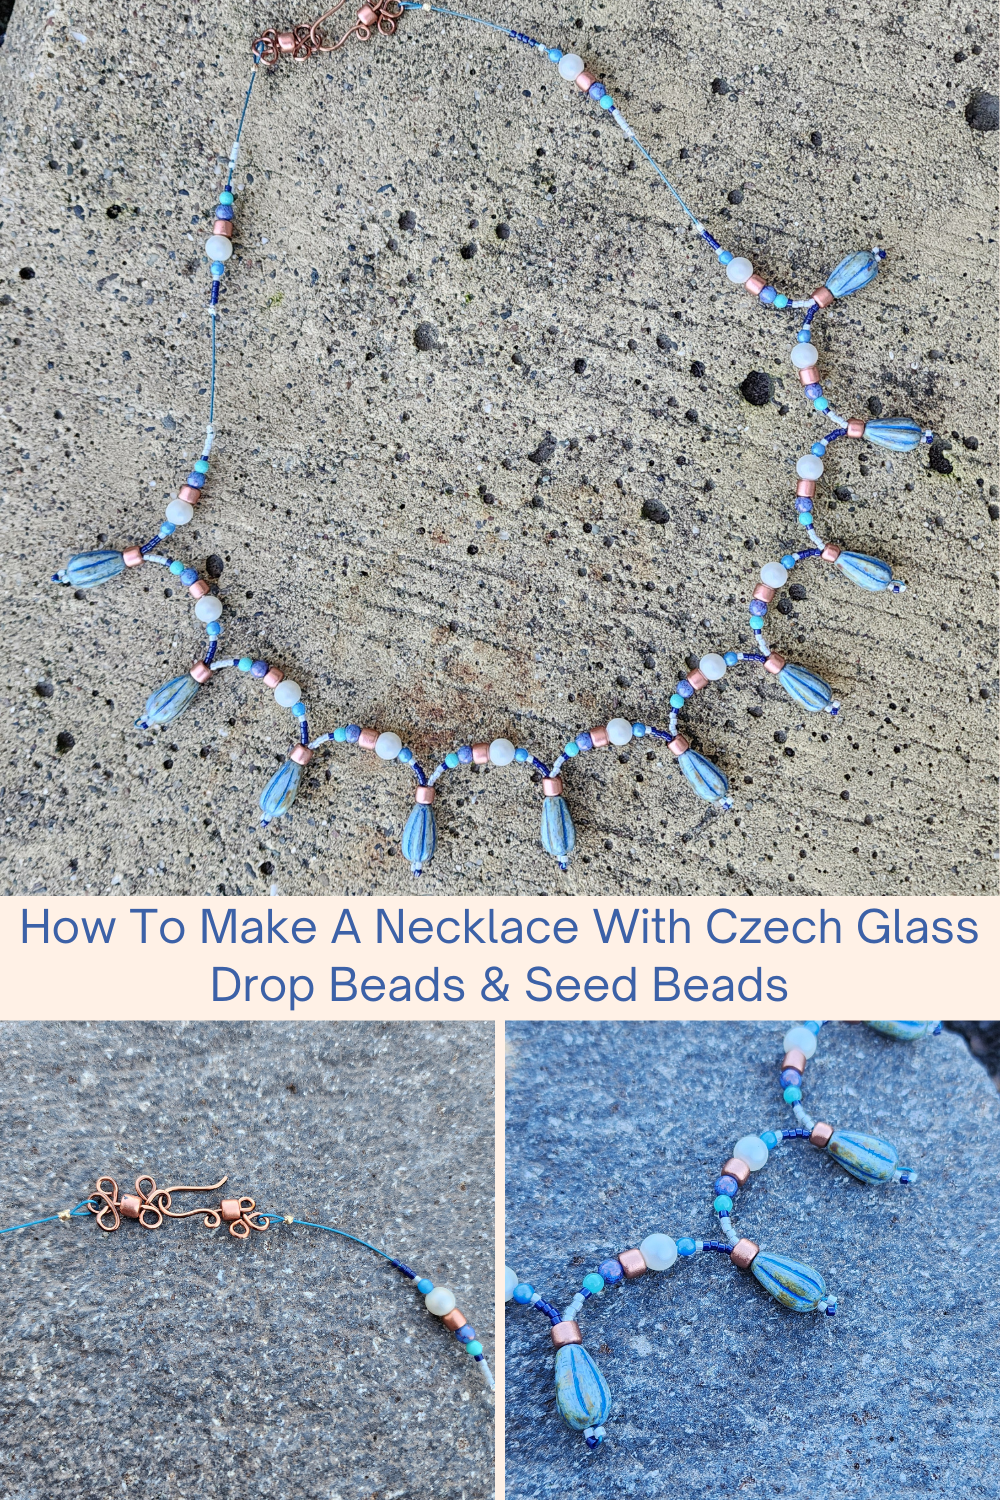 How To Make A Necklace With Czech Glass Drop Beads & Seed Beads Collage